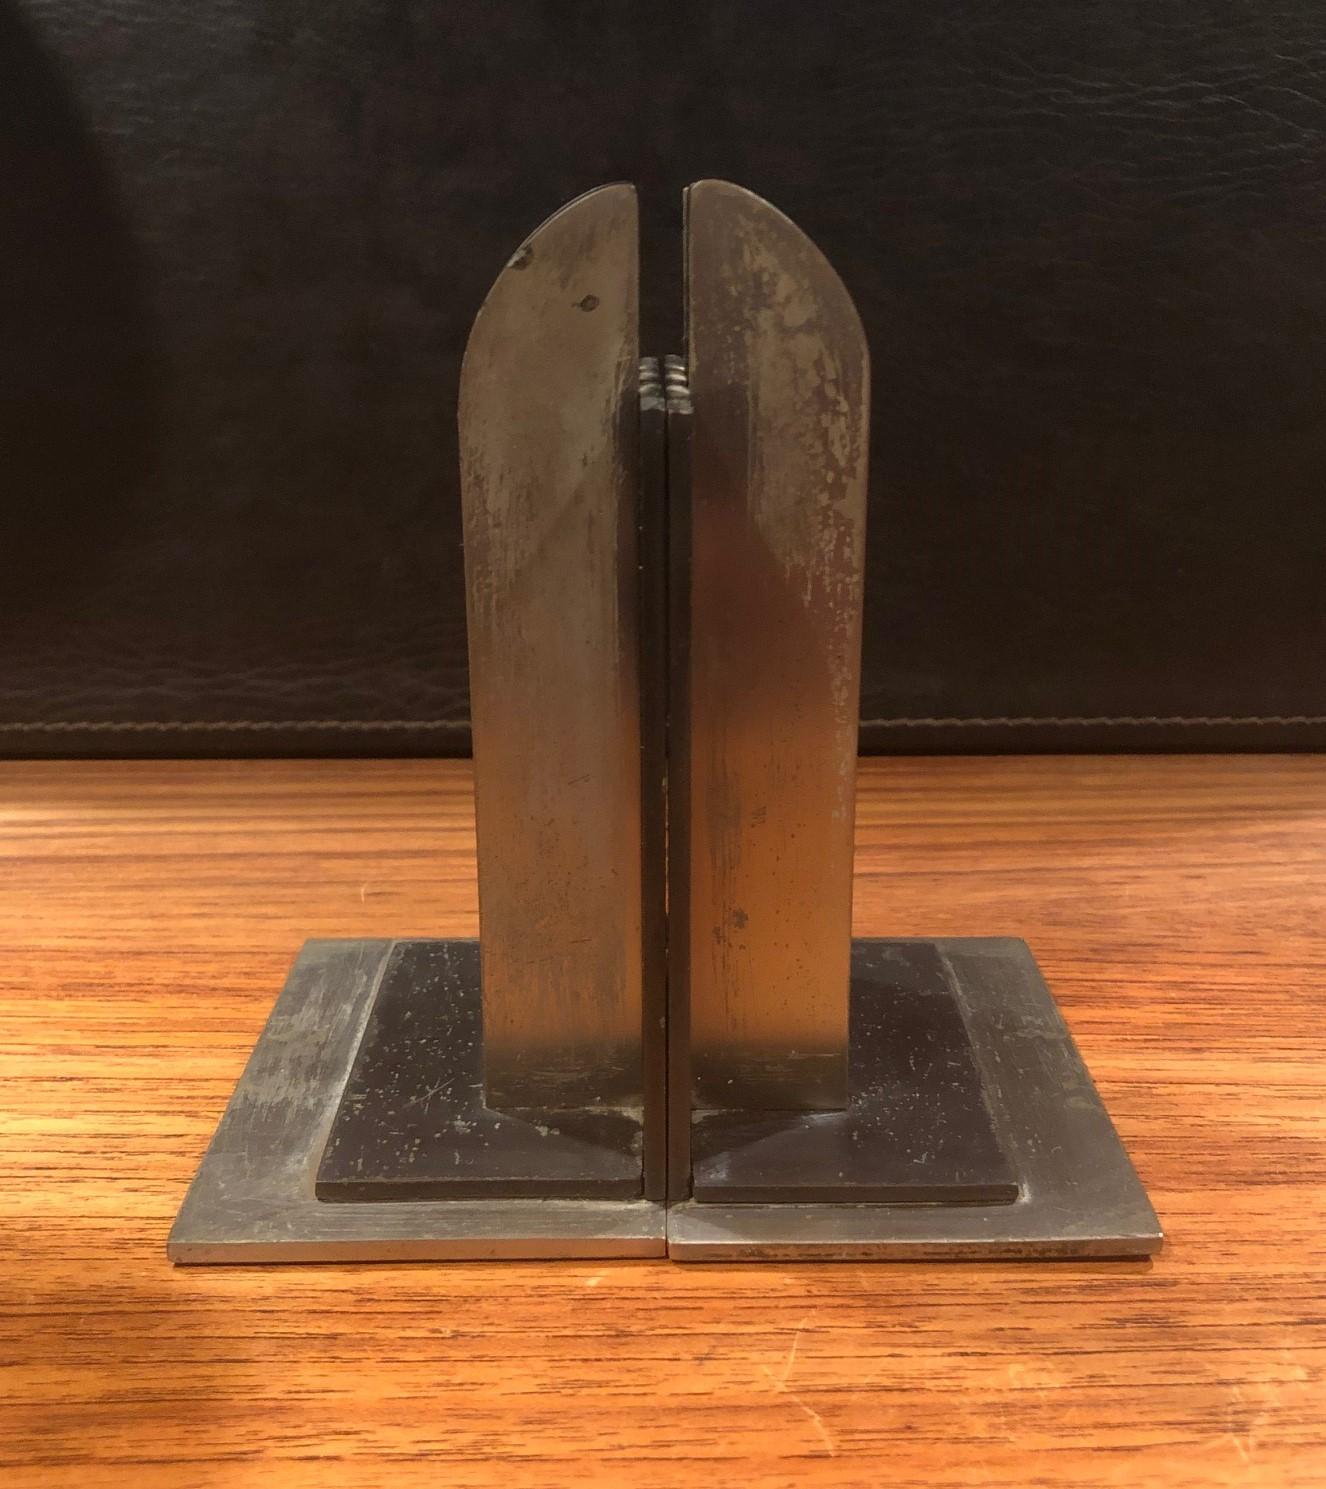 Pair of Machine Age Art Deco Bookends by Walter Von Nessen for Chase & Co 1